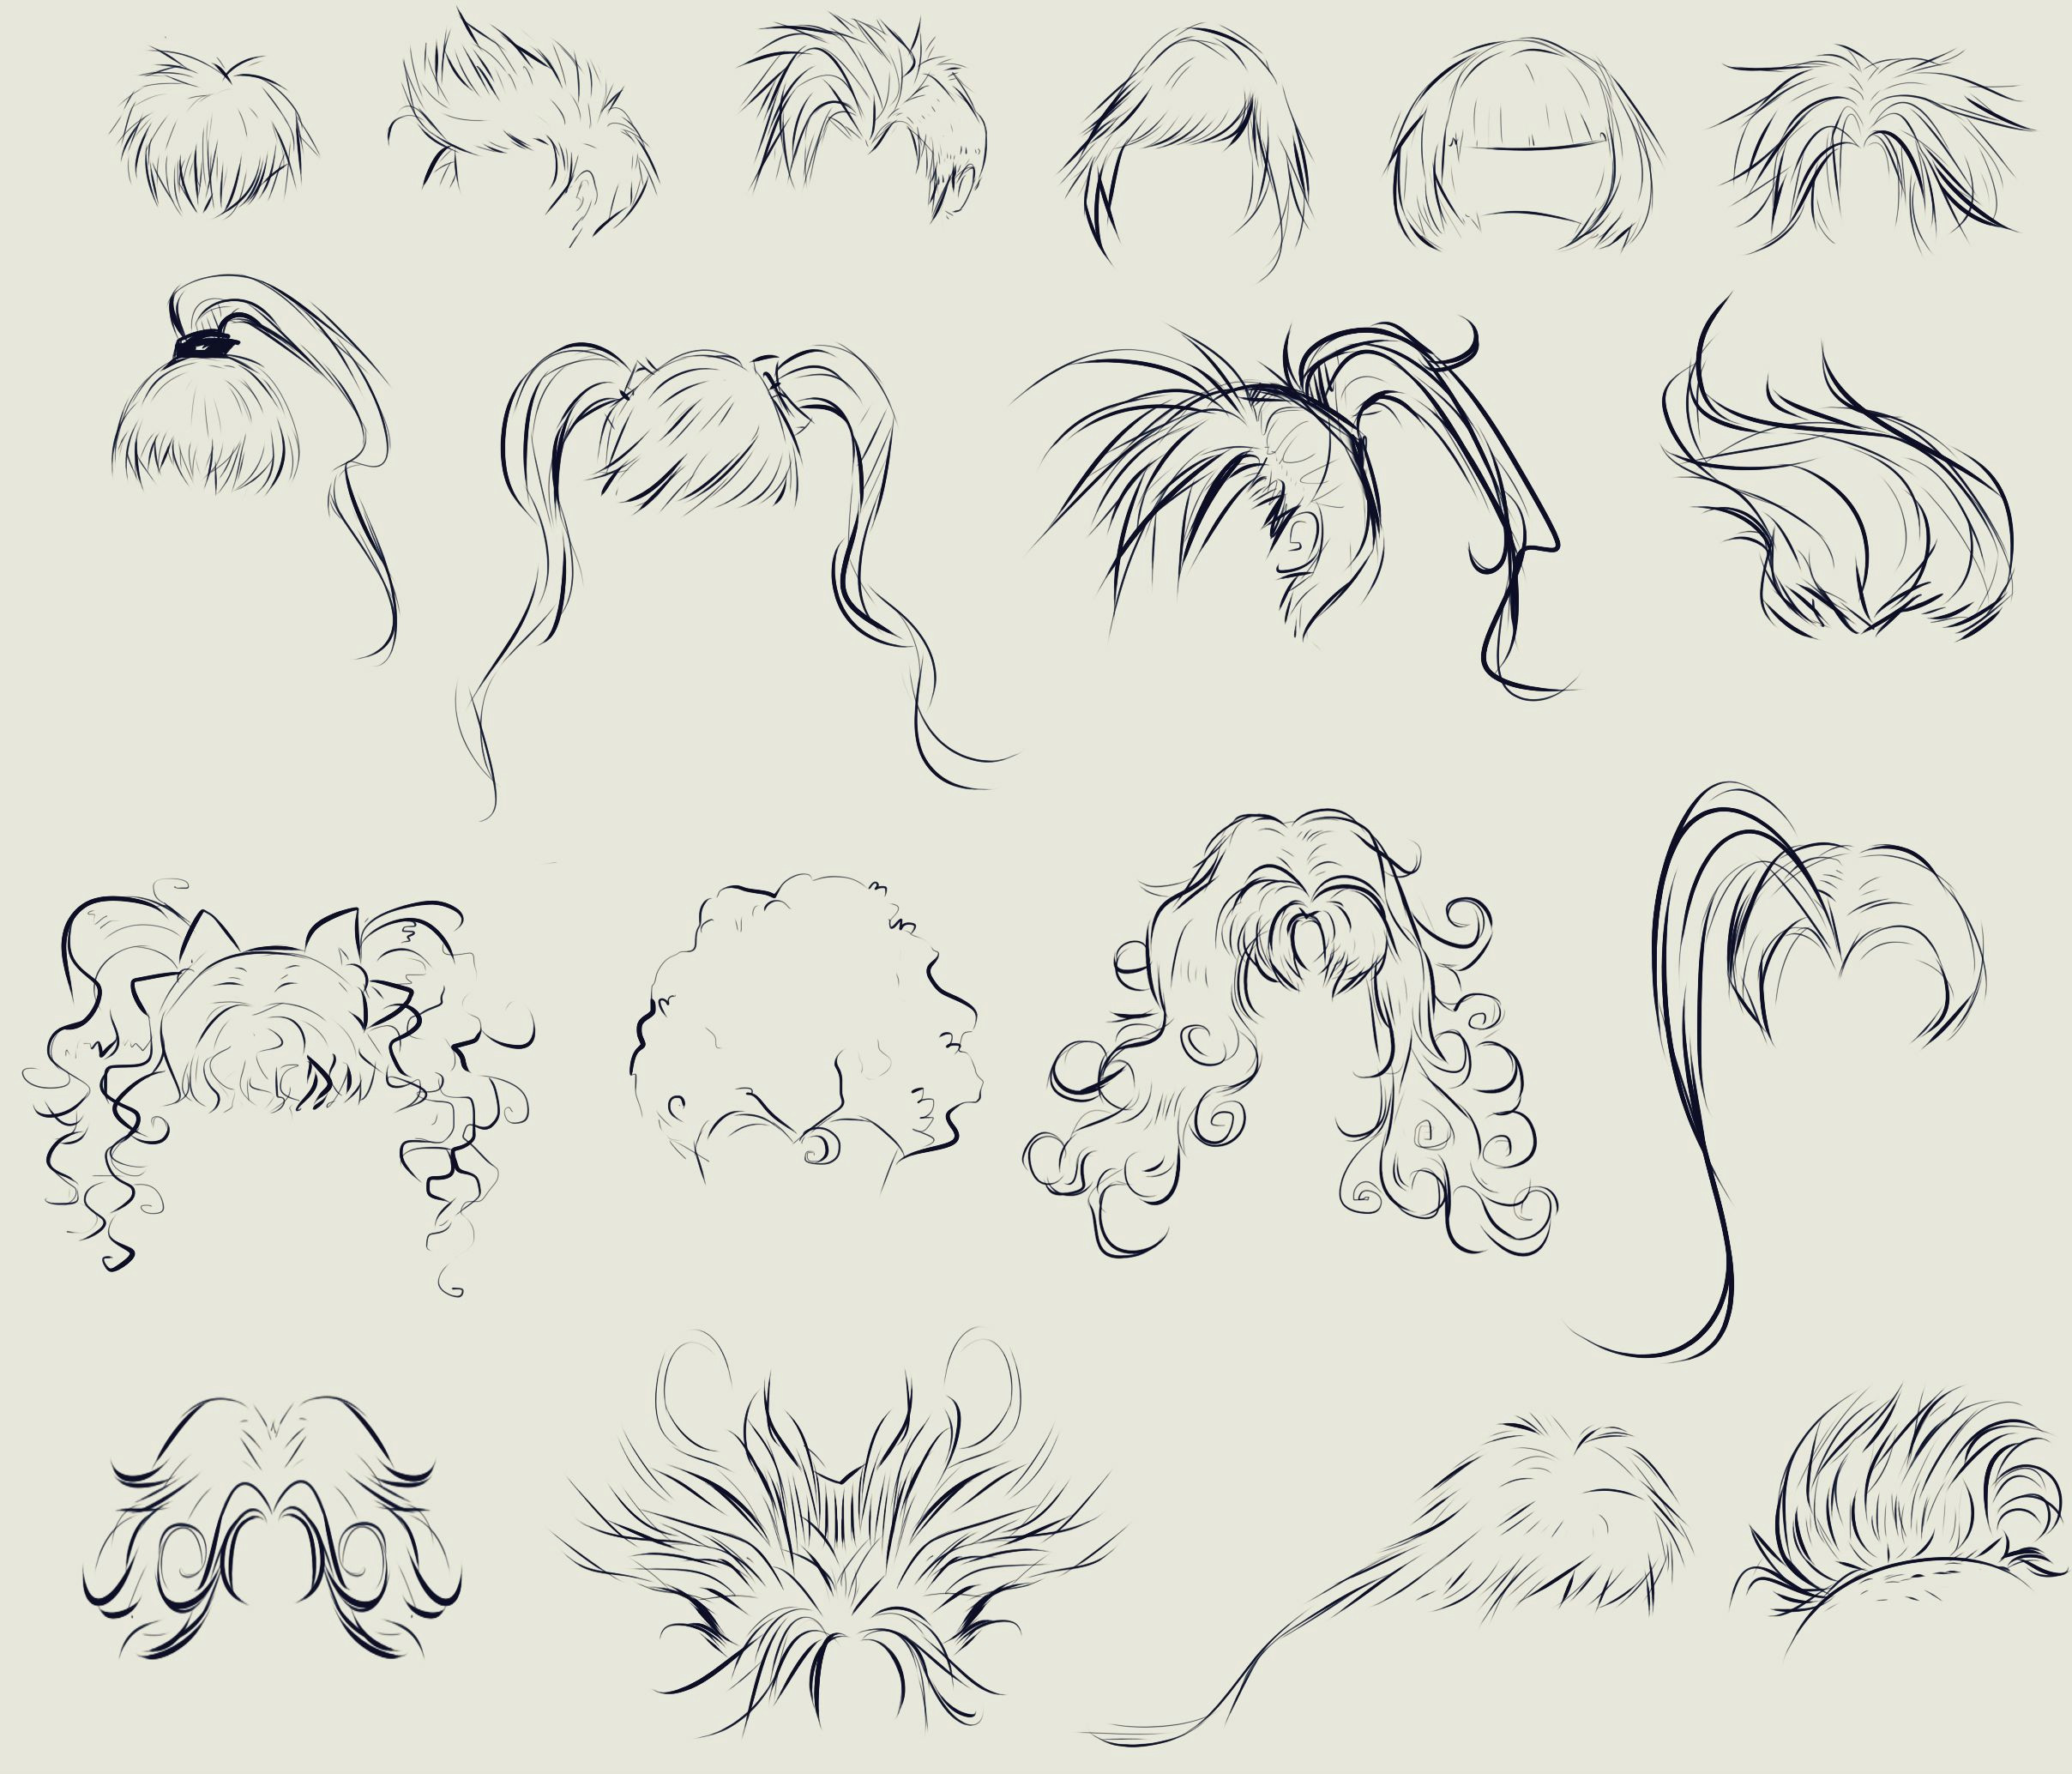 Drawing An Anime Mouth This Anime Hair Reference Sheet by Ryky is All You Need to Get Those